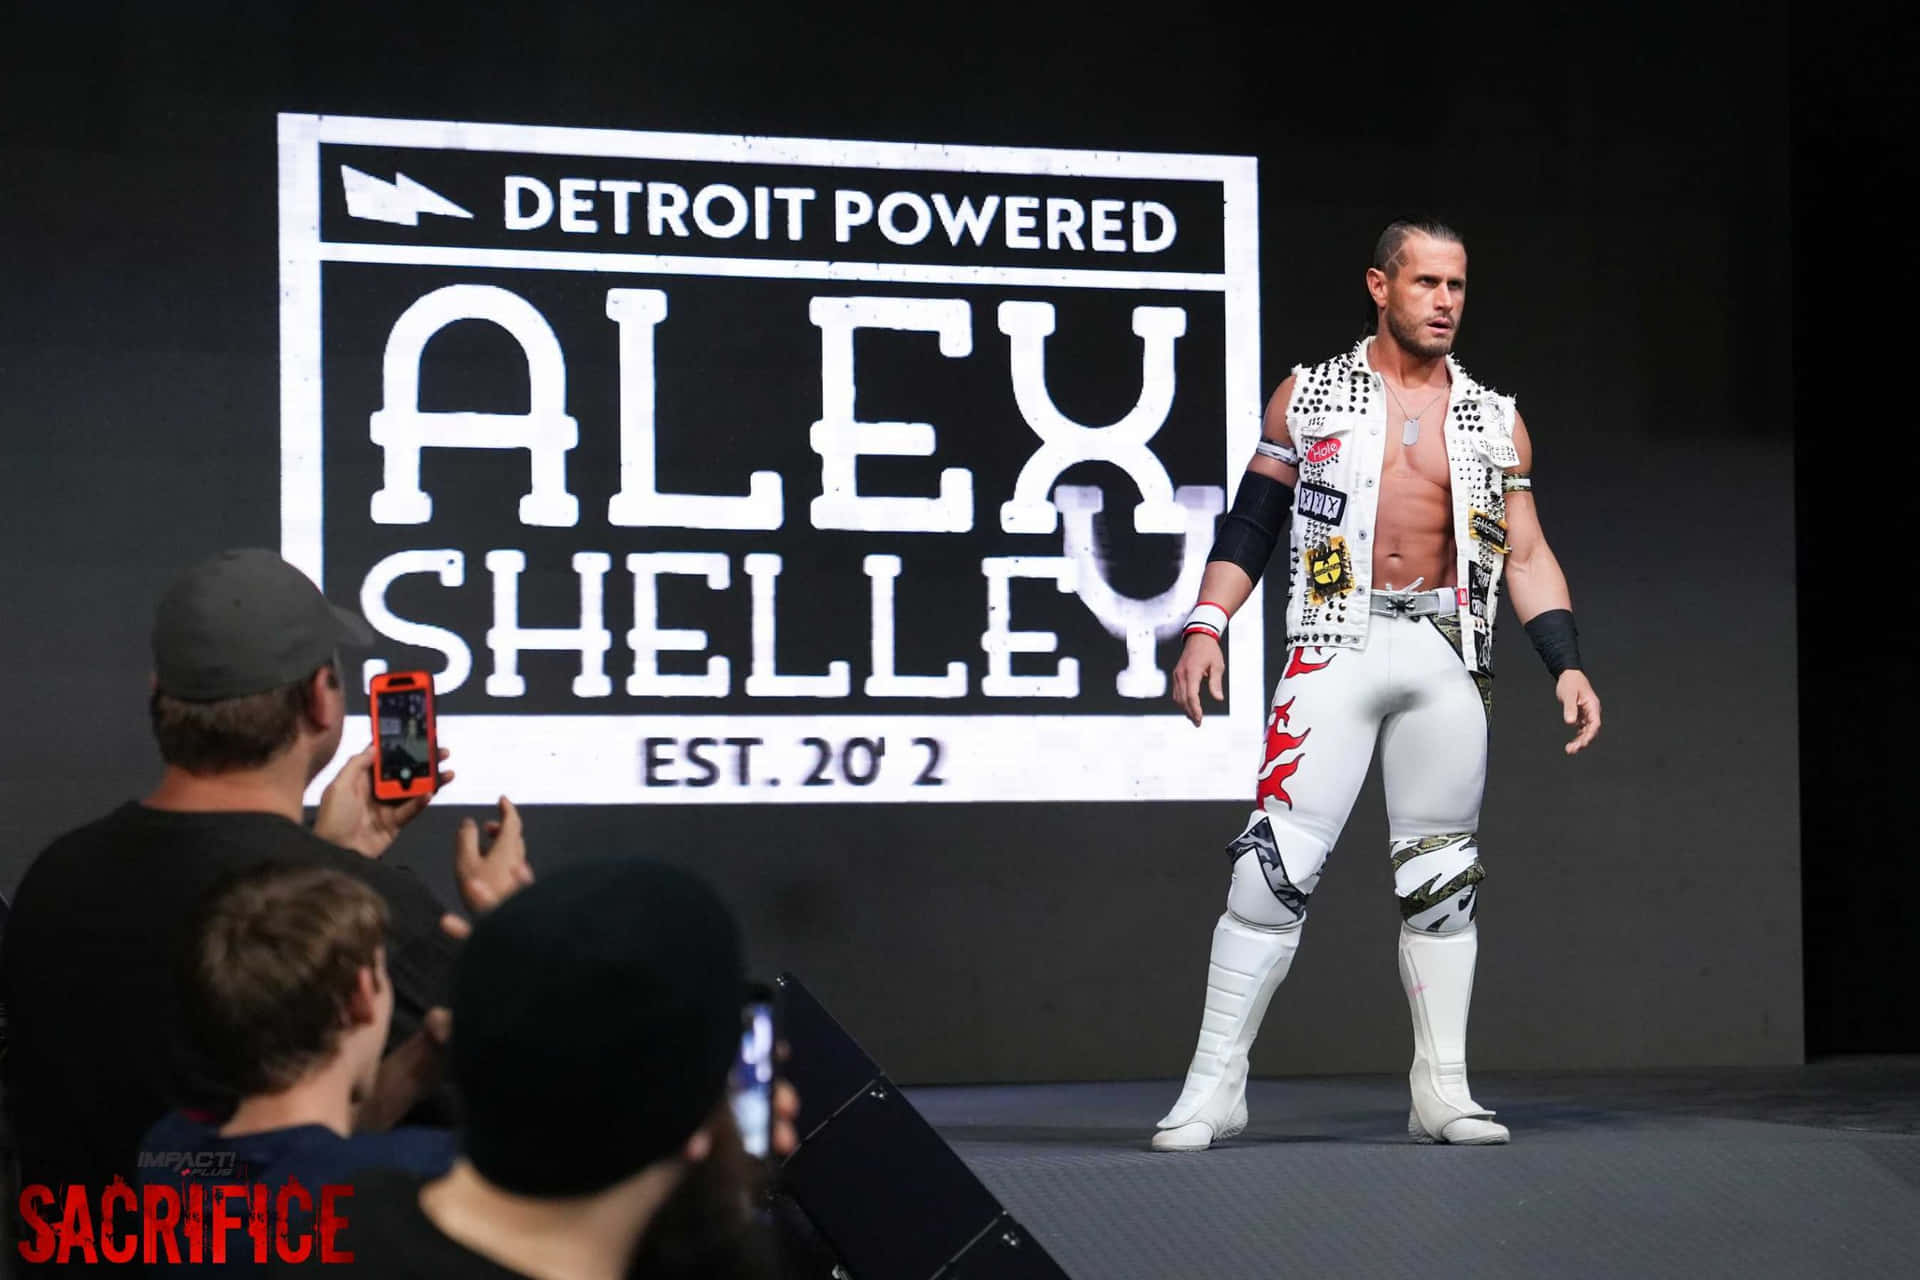 Alex Shelley Posing With Detroit Powered Poster Wallpaper